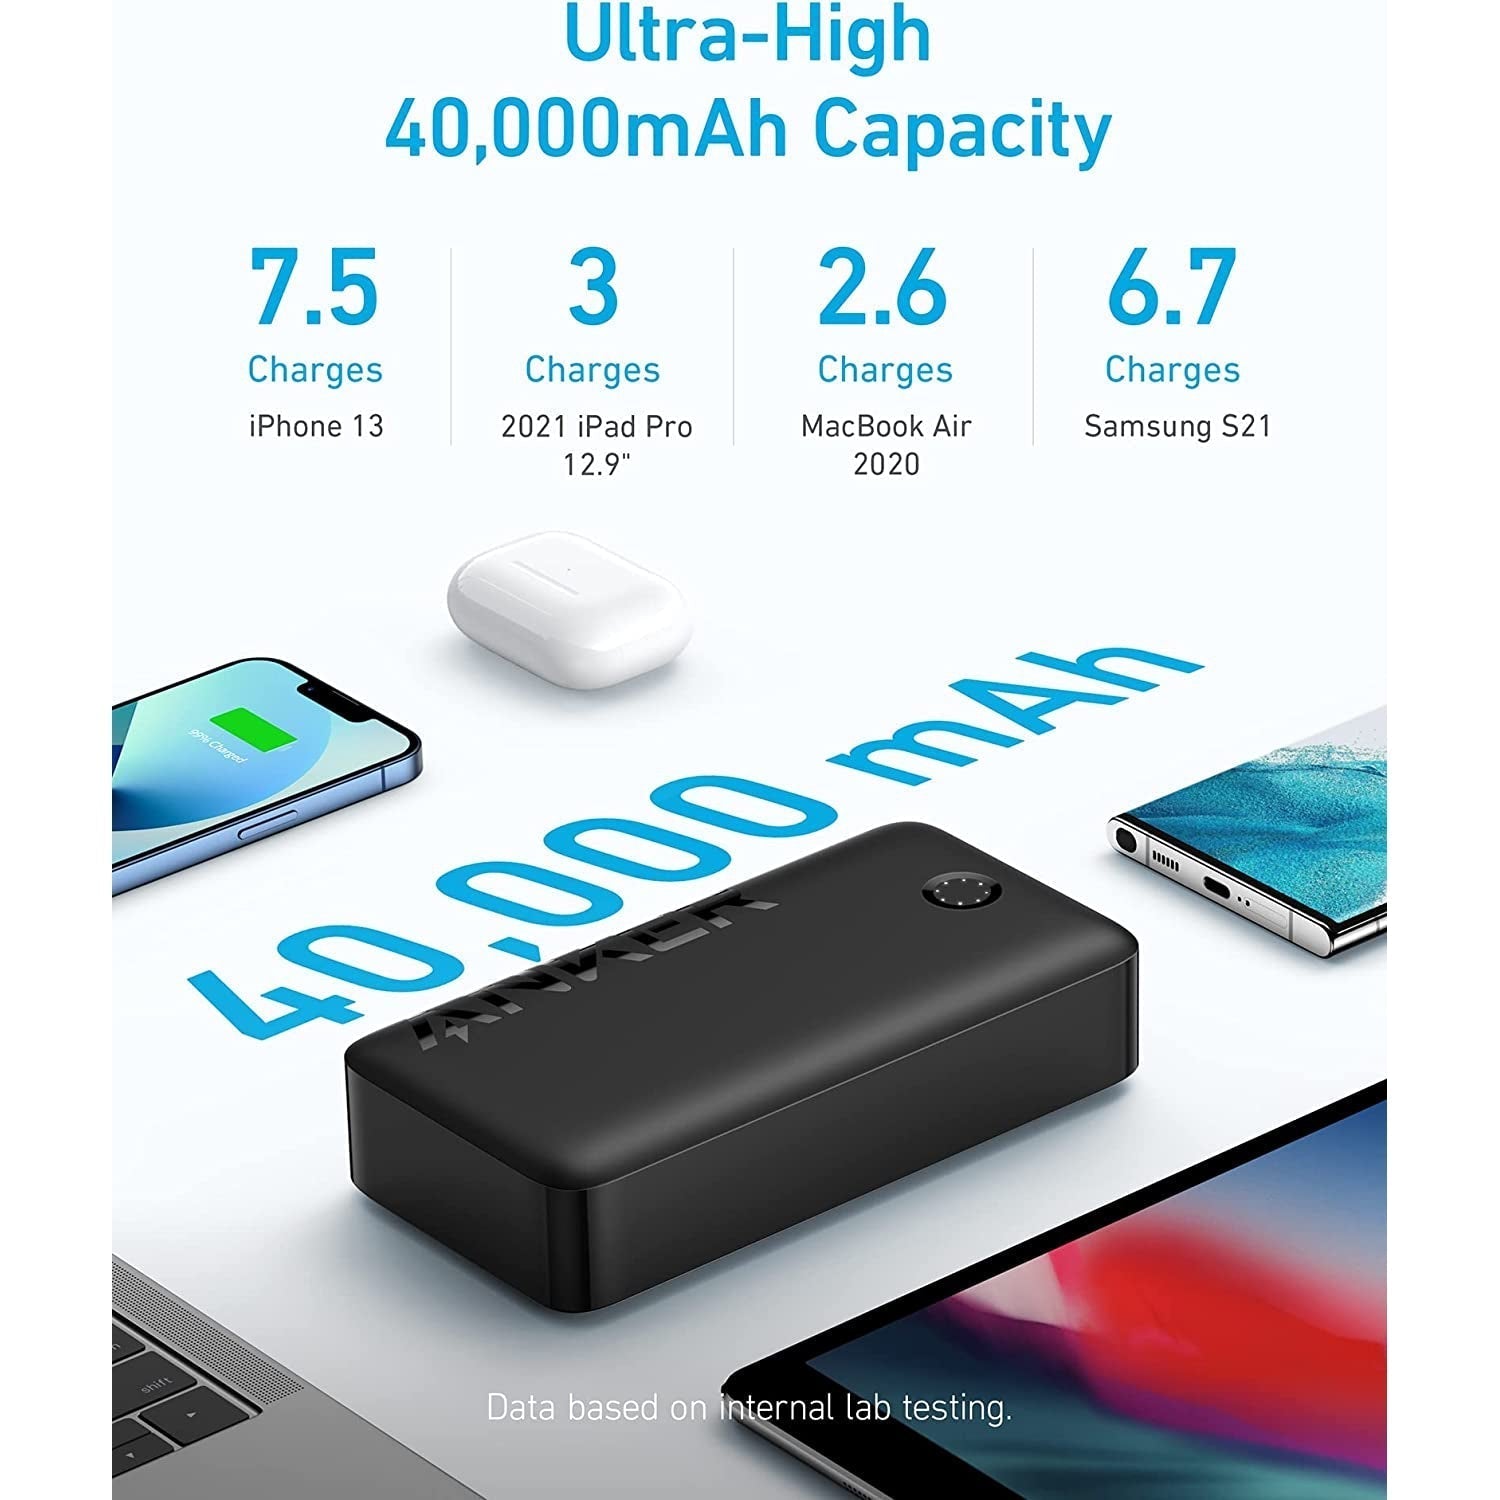 Anker Power Bank, 347 Portable Charger (PowerCore 40K), 40,000mAh Battery Pack with USB-C High-Speed Charging -Black